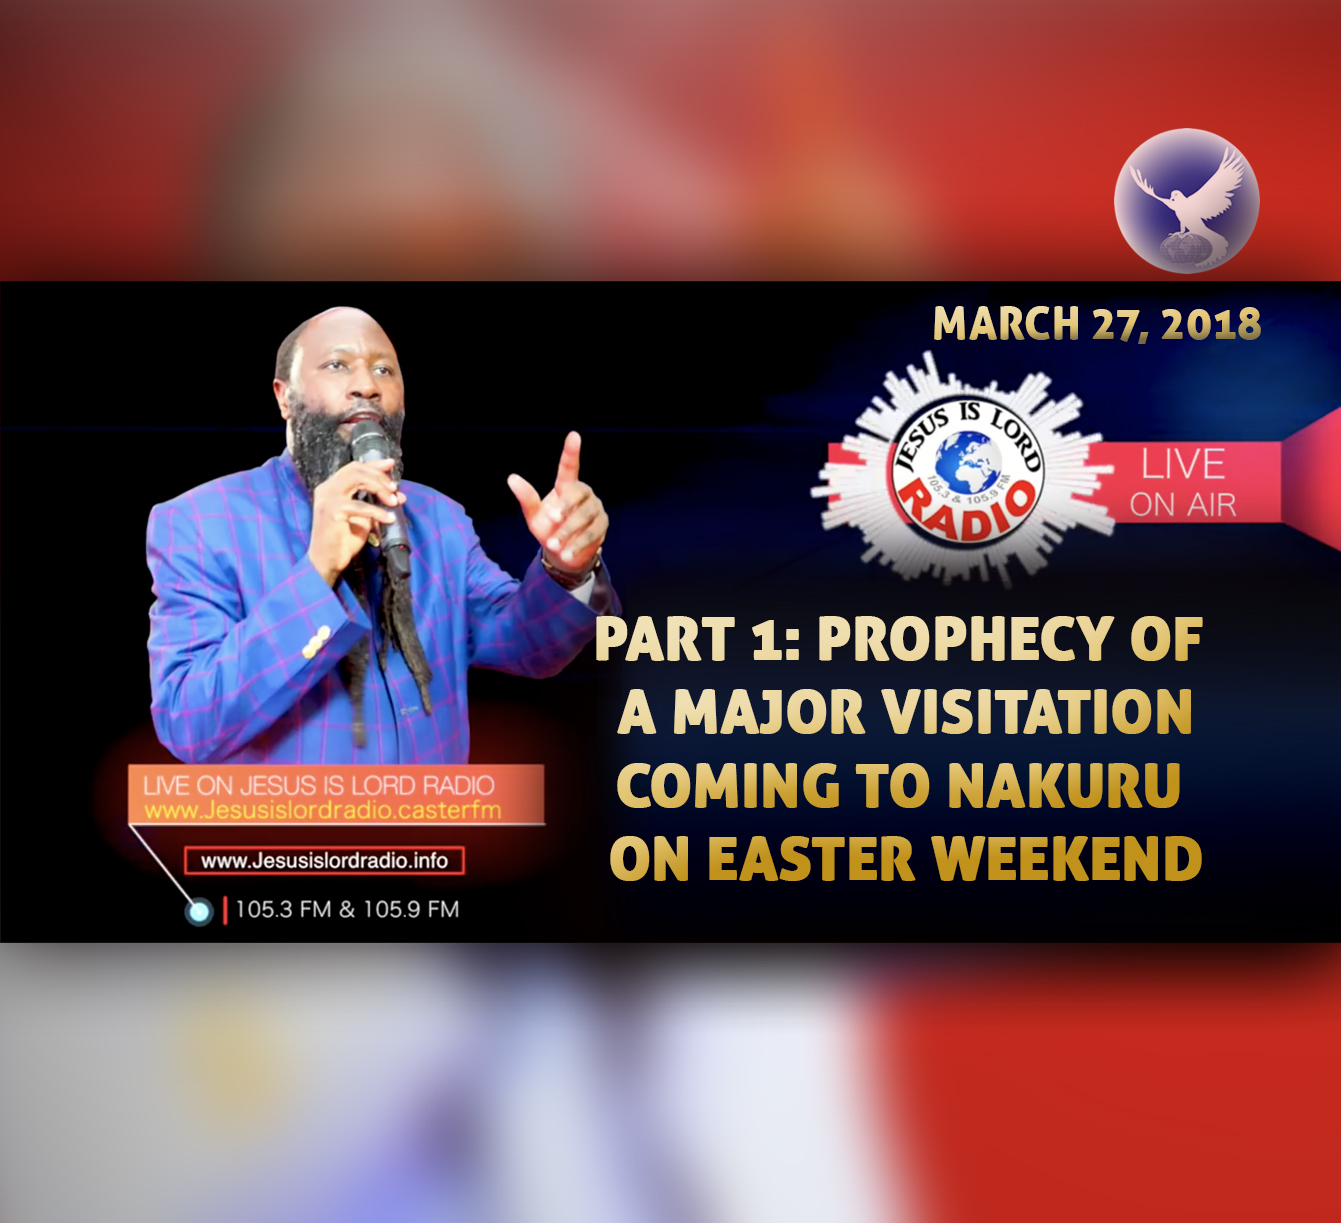 EPISODE 156 - PART 1: PROPHECY OF A MAJOR VISITATION COMING TO NAKURU ON EASTER WEEKEND (27MAR2018) - PROPHET DR. OWUOR